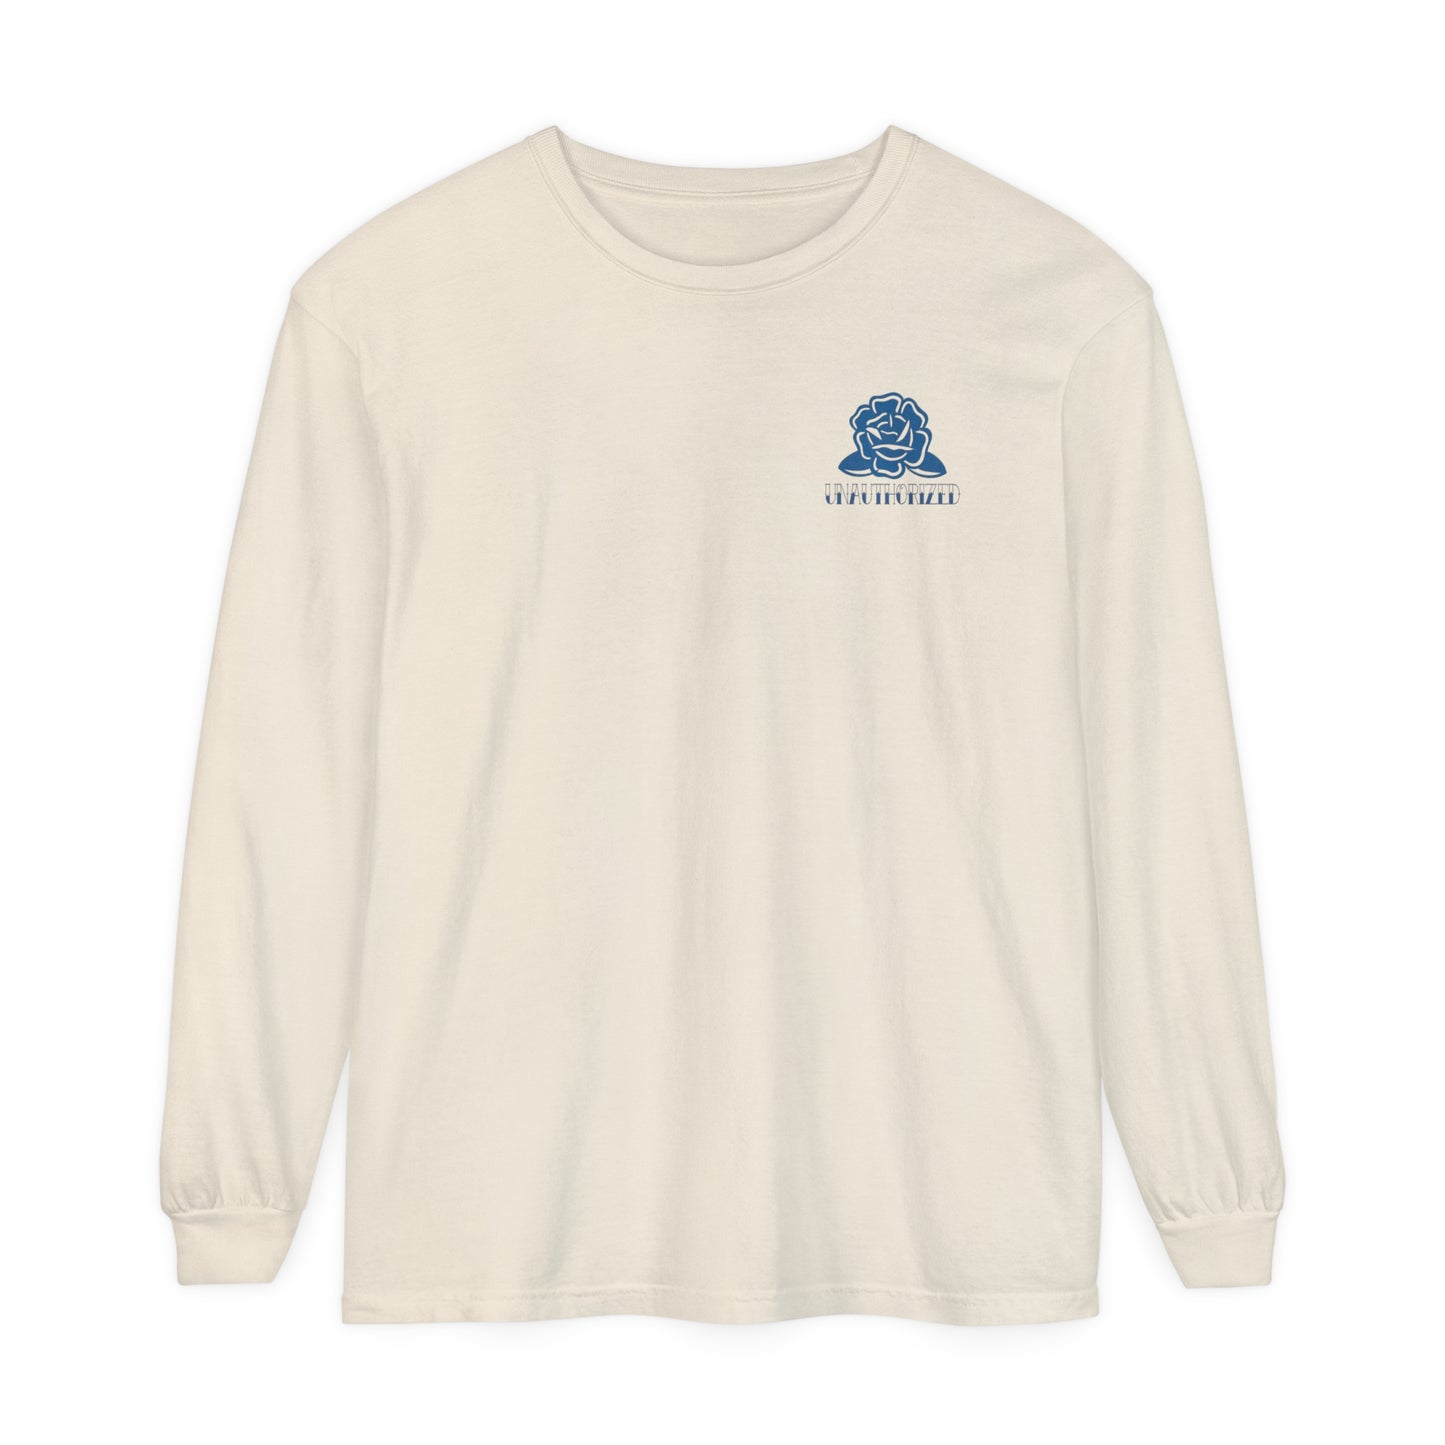 Righteous, right hand,  Garment-dyed Long Sleeve